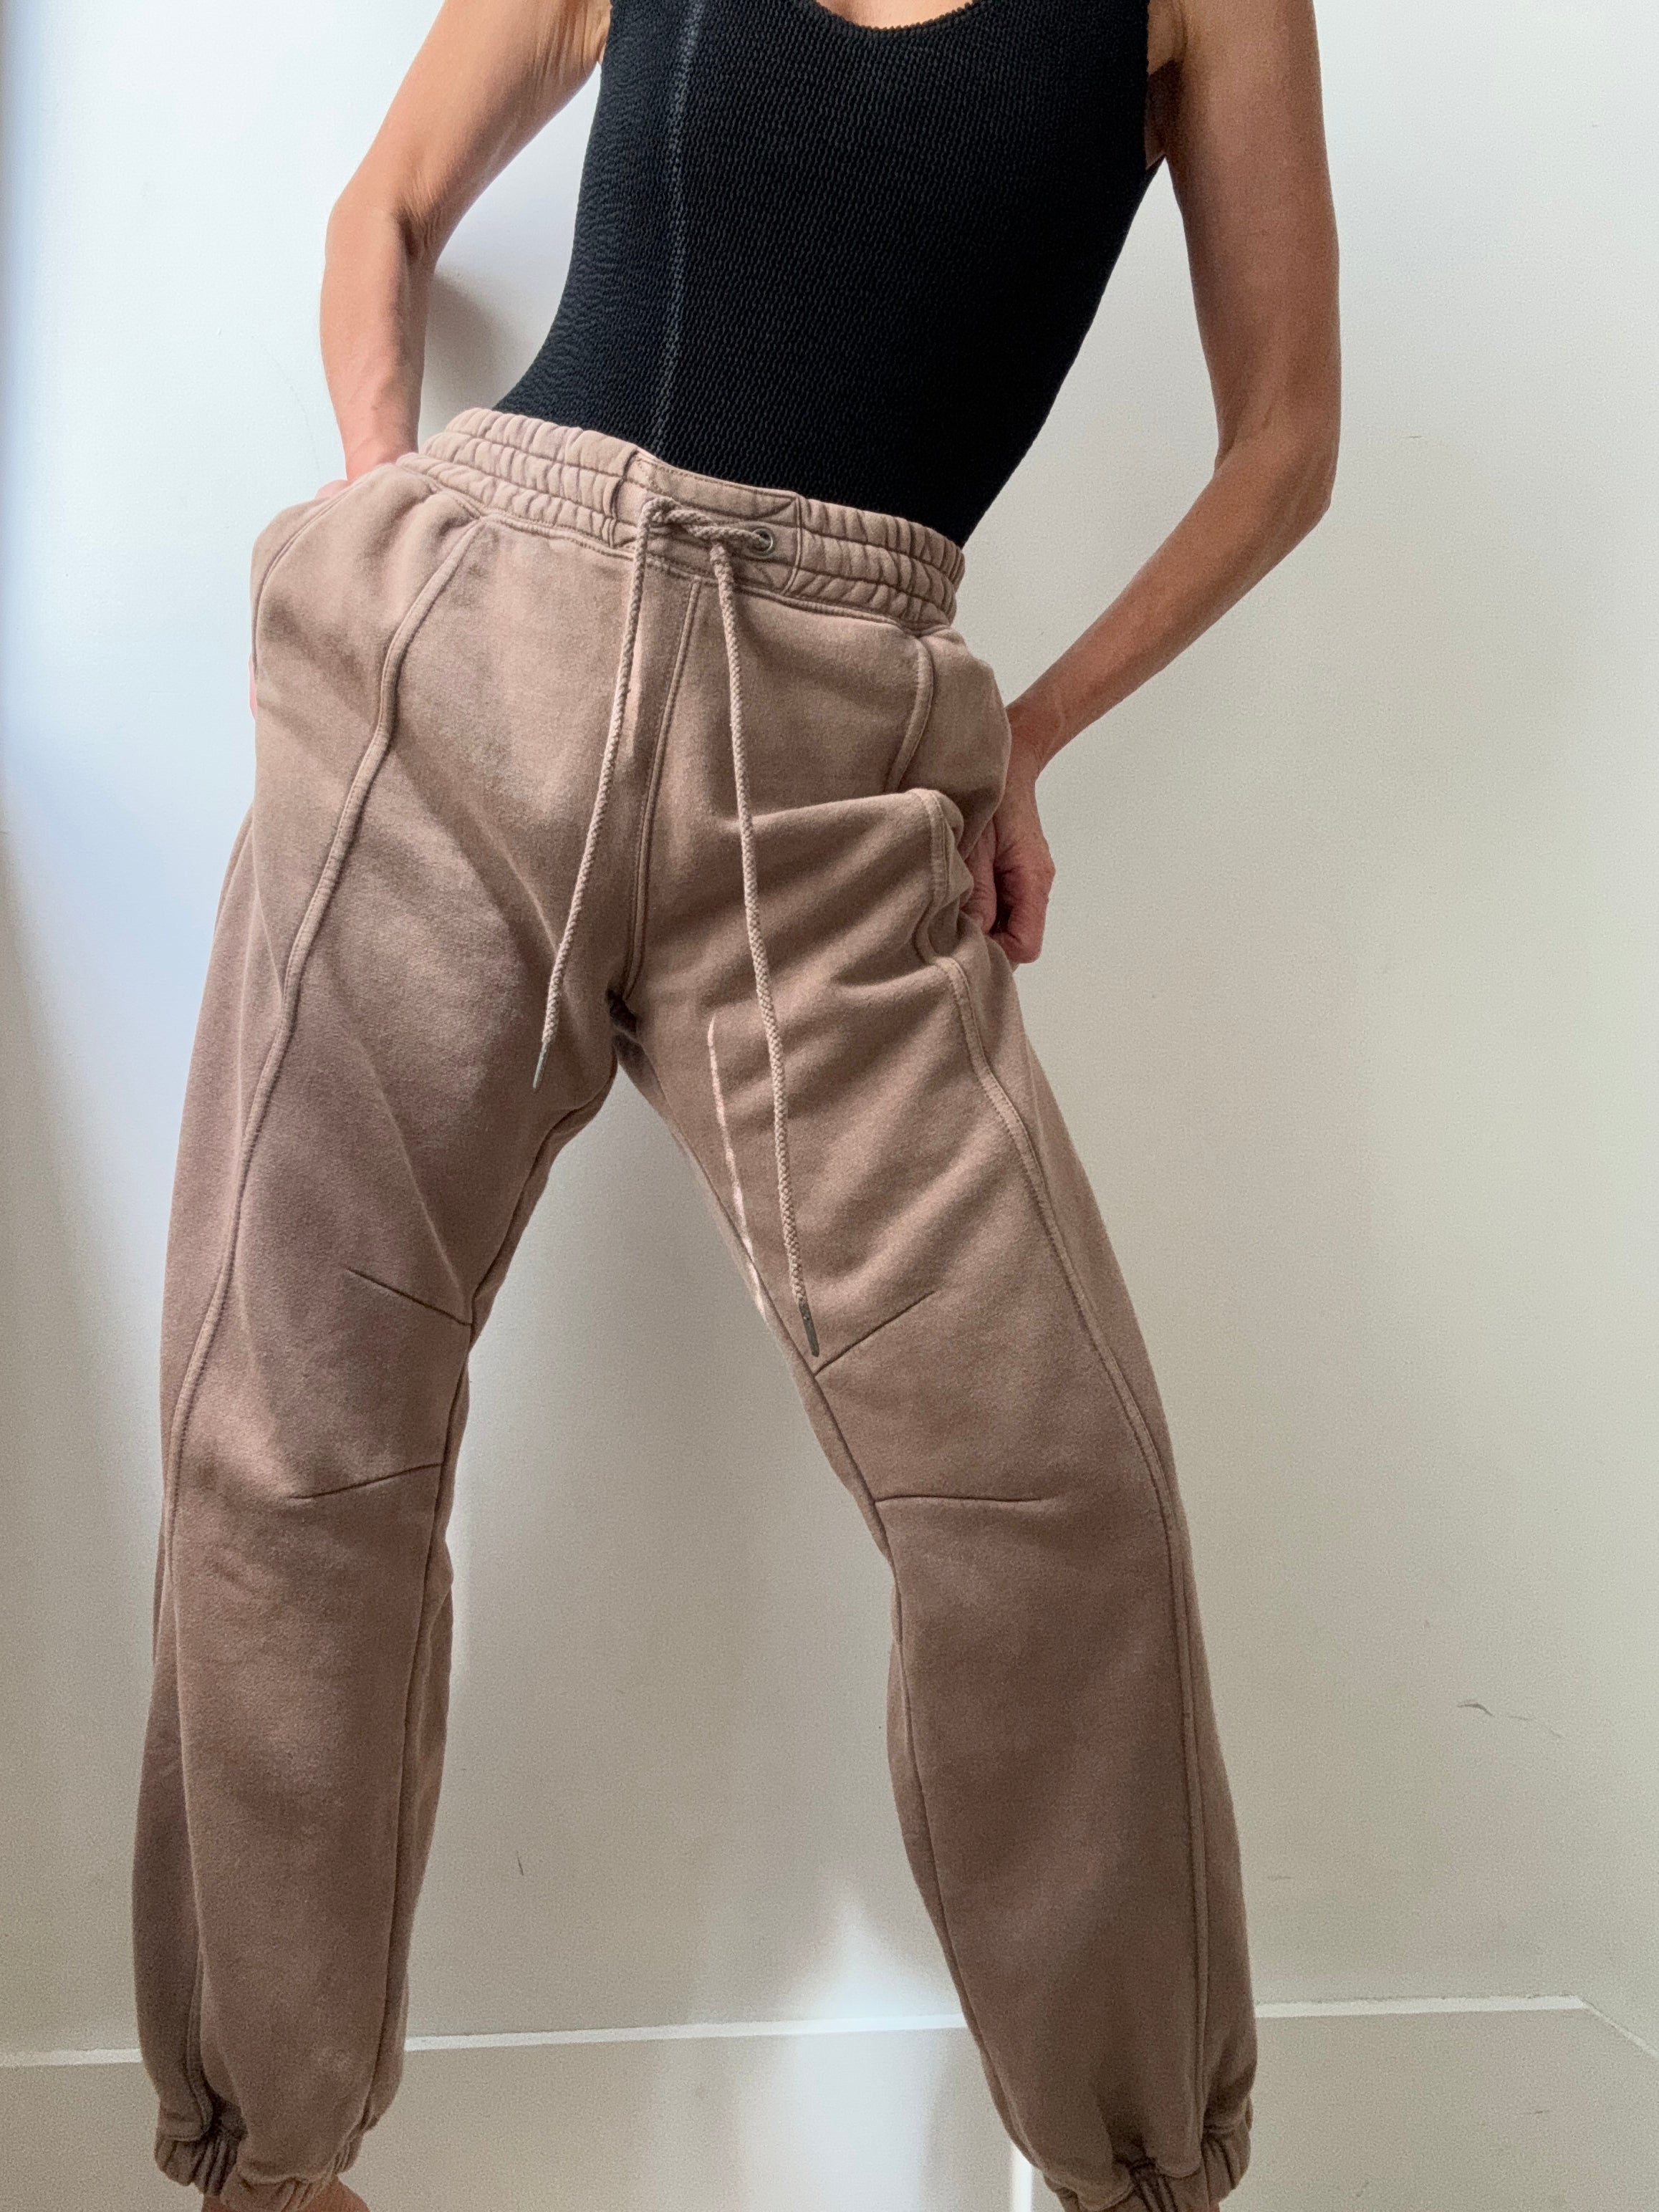 Free People Pants Sprint To The Finish Pants Hickory